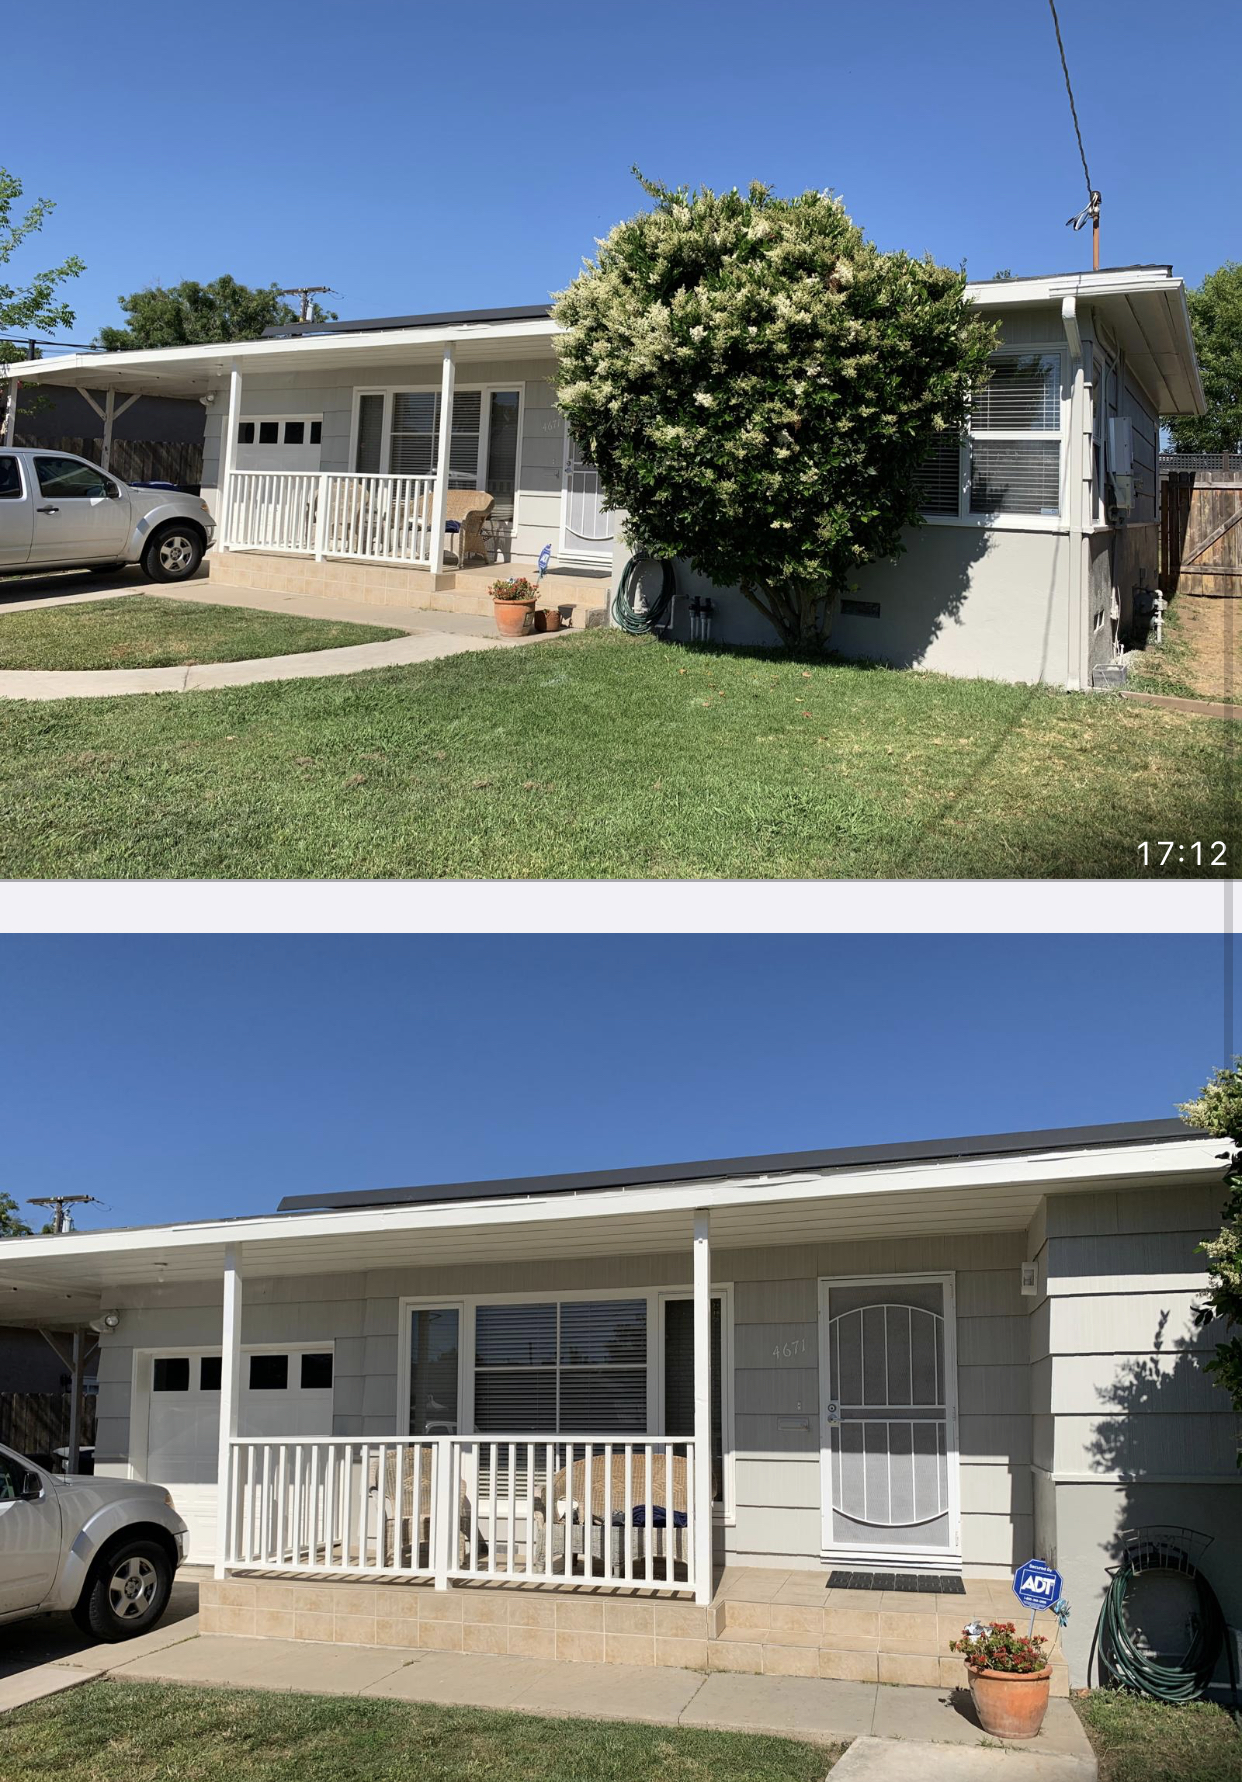 House Painting in San Diego, 92115